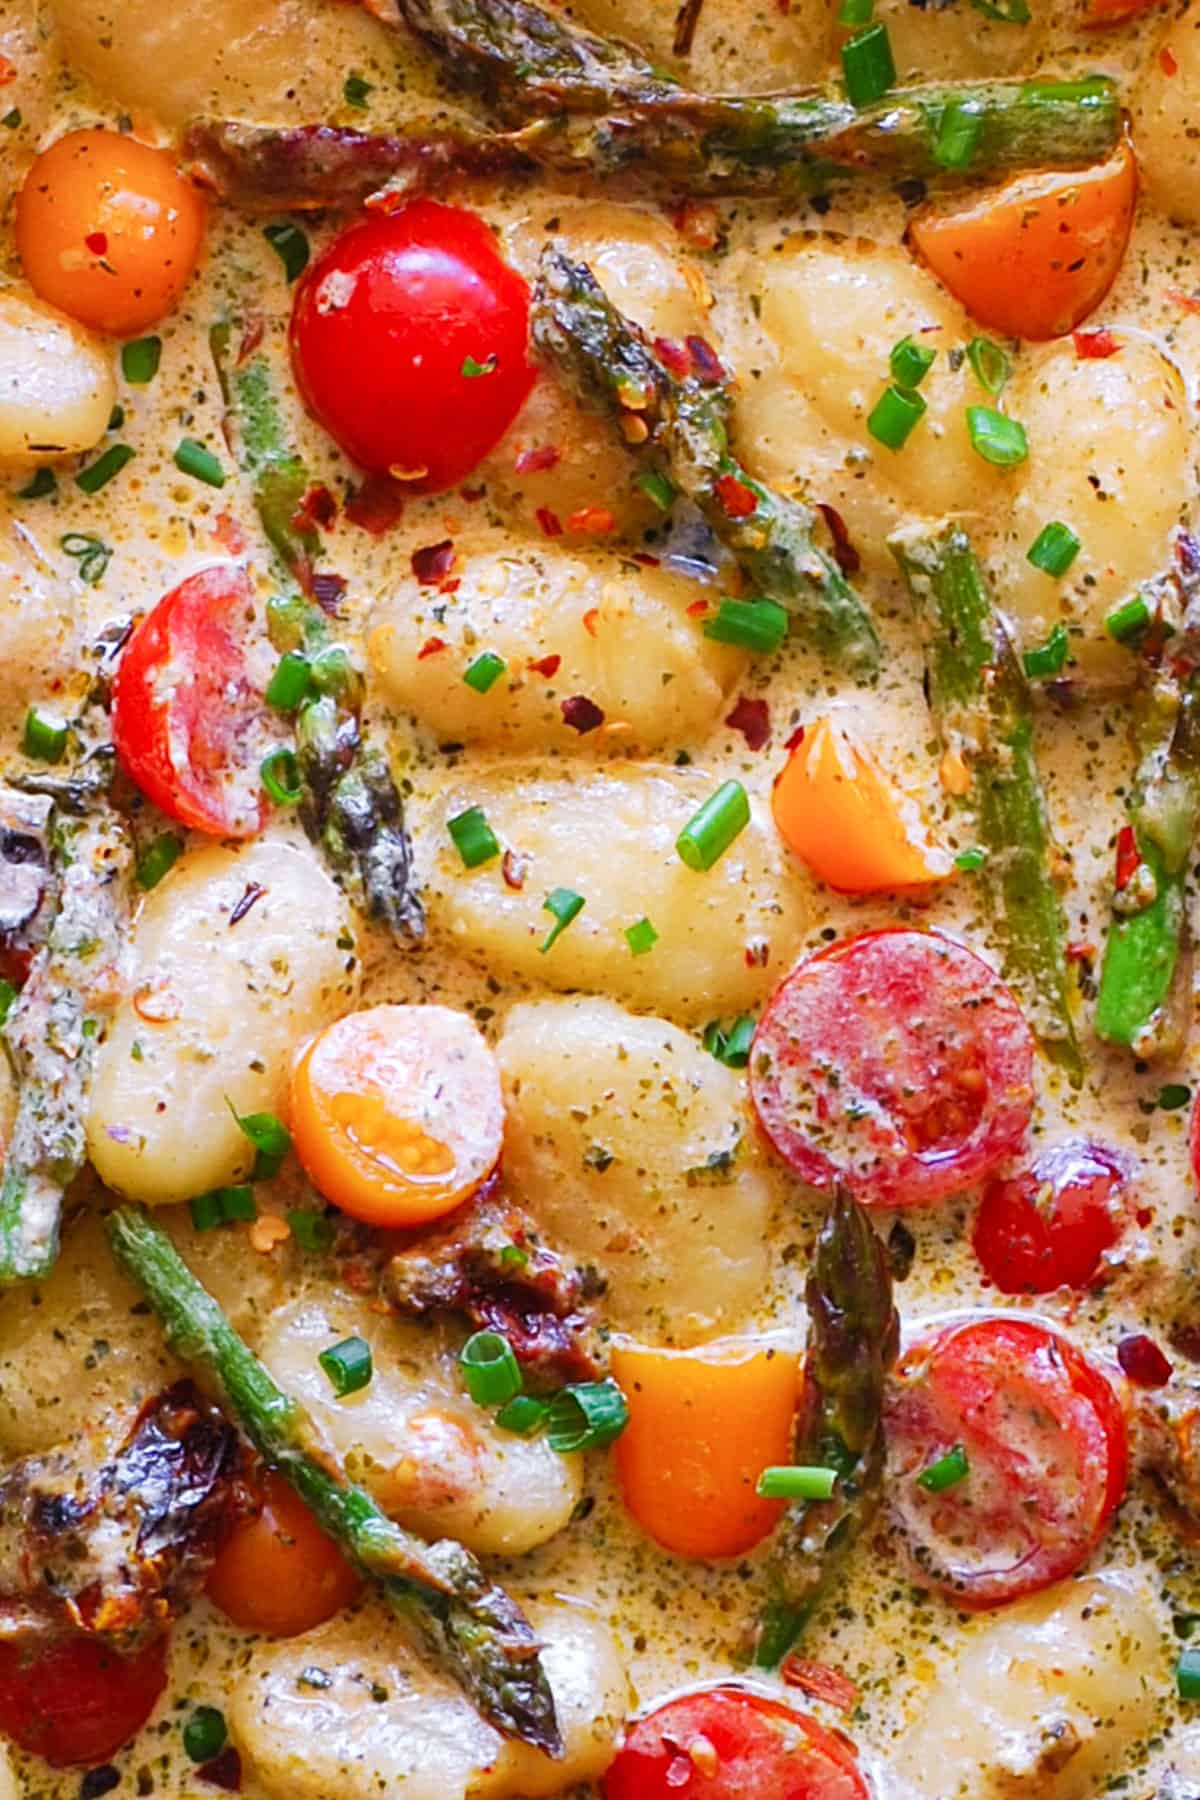 Creamy Pesto Gnocchi with Red and Yellow Cherry Tomatoes and Asparagus - close-up photo.